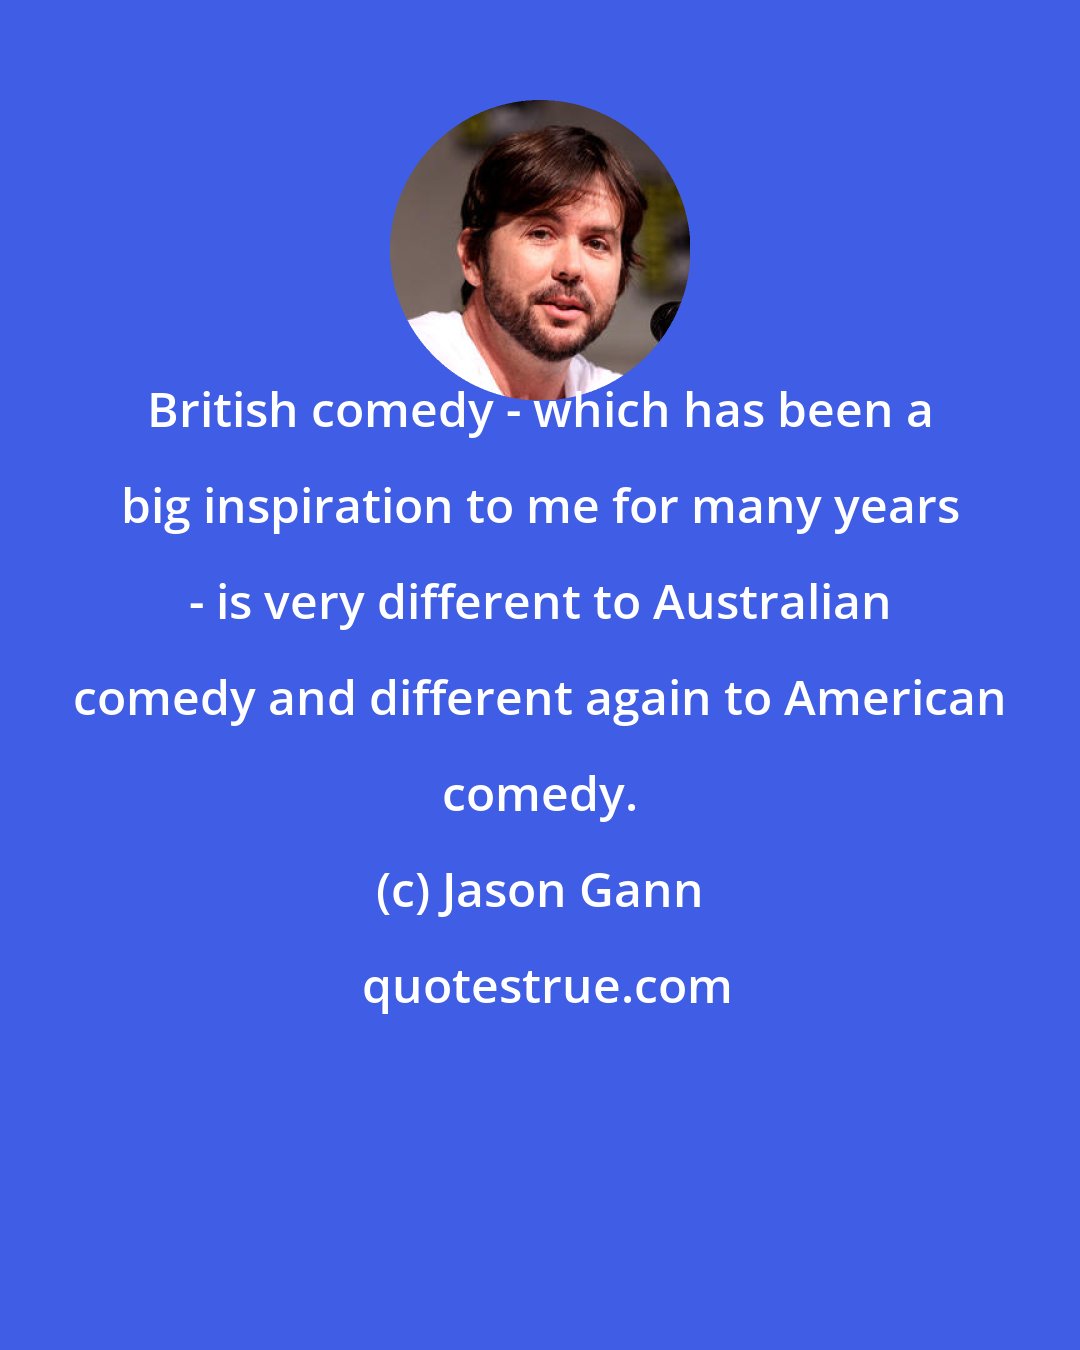 Jason Gann: British comedy - which has been a big inspiration to me for many years - is very different to Australian comedy and different again to American comedy.